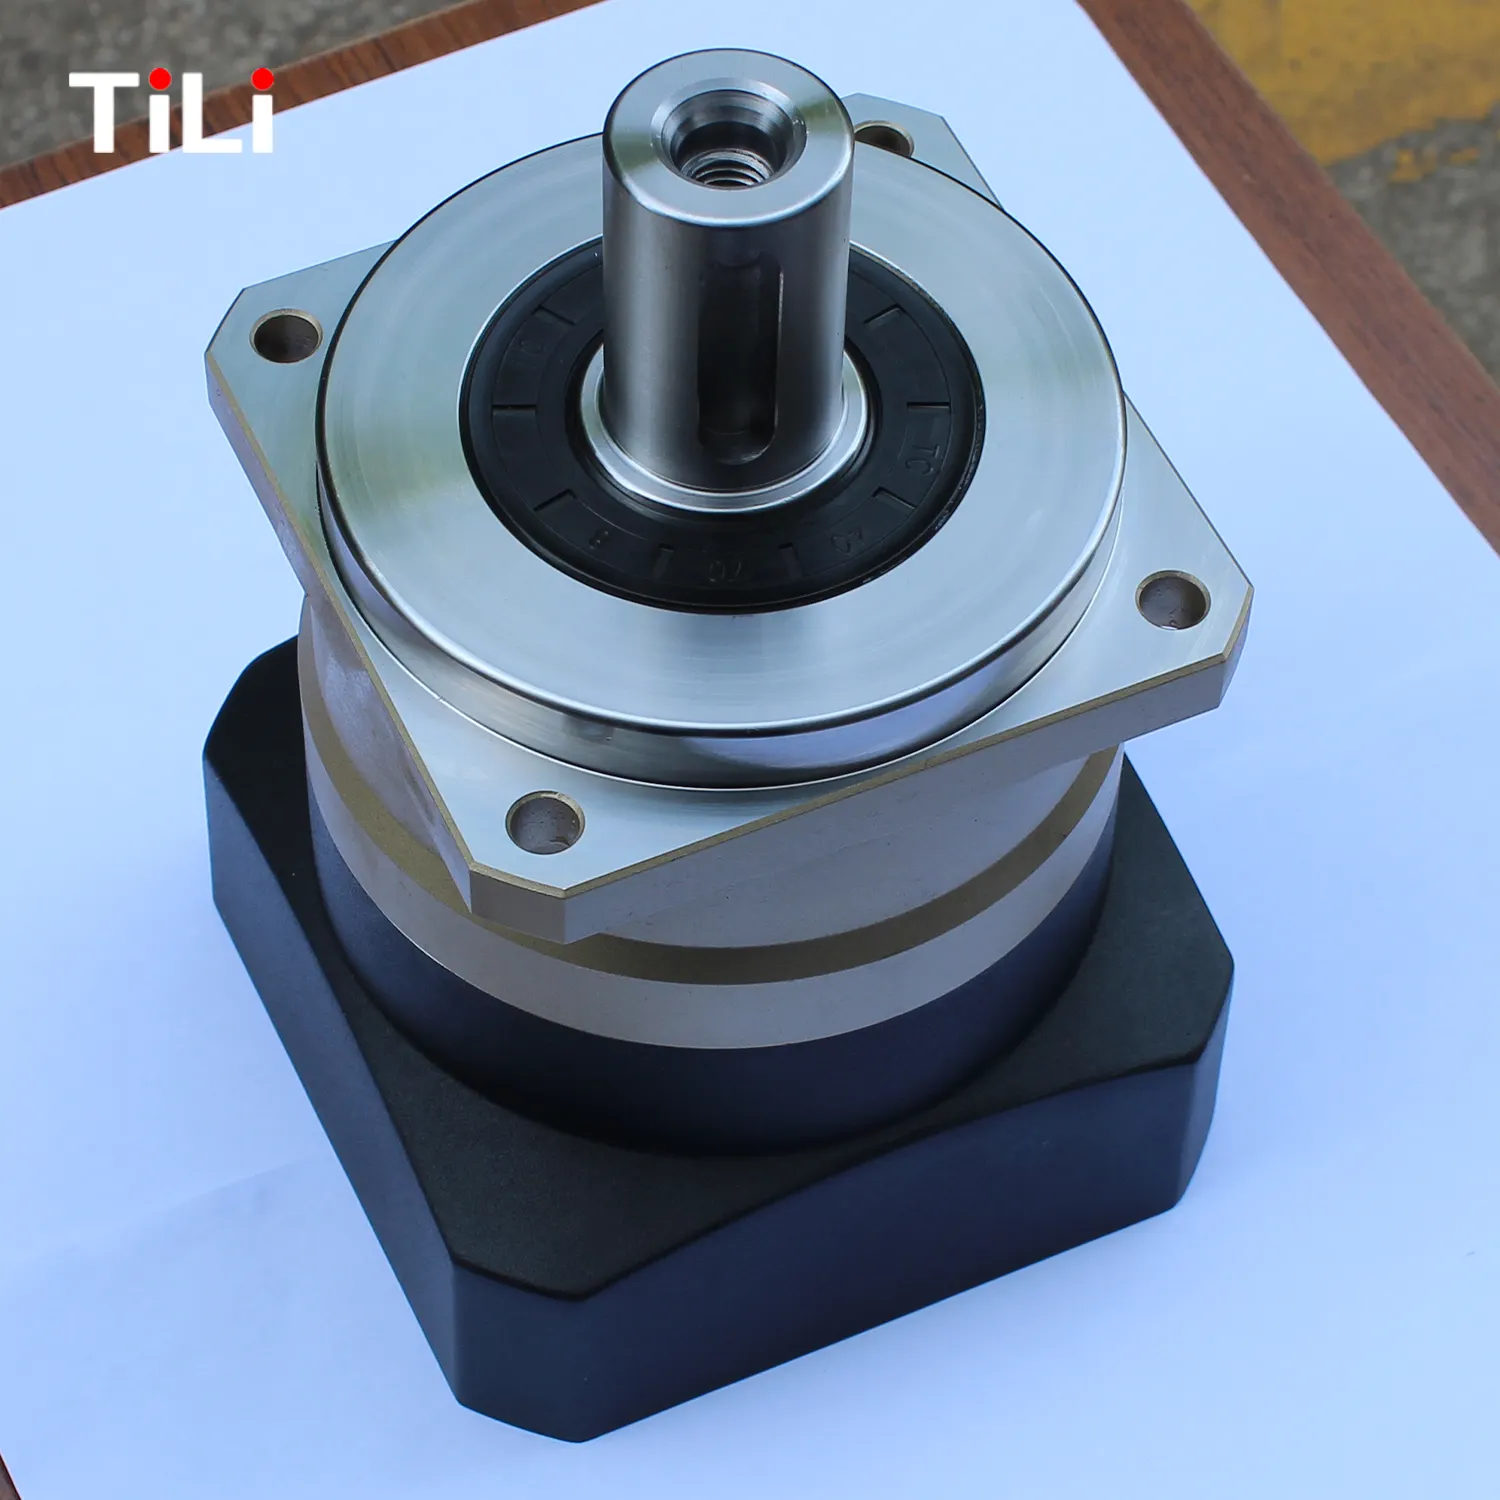 TILI TVB Series Planetary Gearbox Speed Reducer Gearbox Flange 90 Degree Transmission Planetary Gear Reducer For Servo Motor